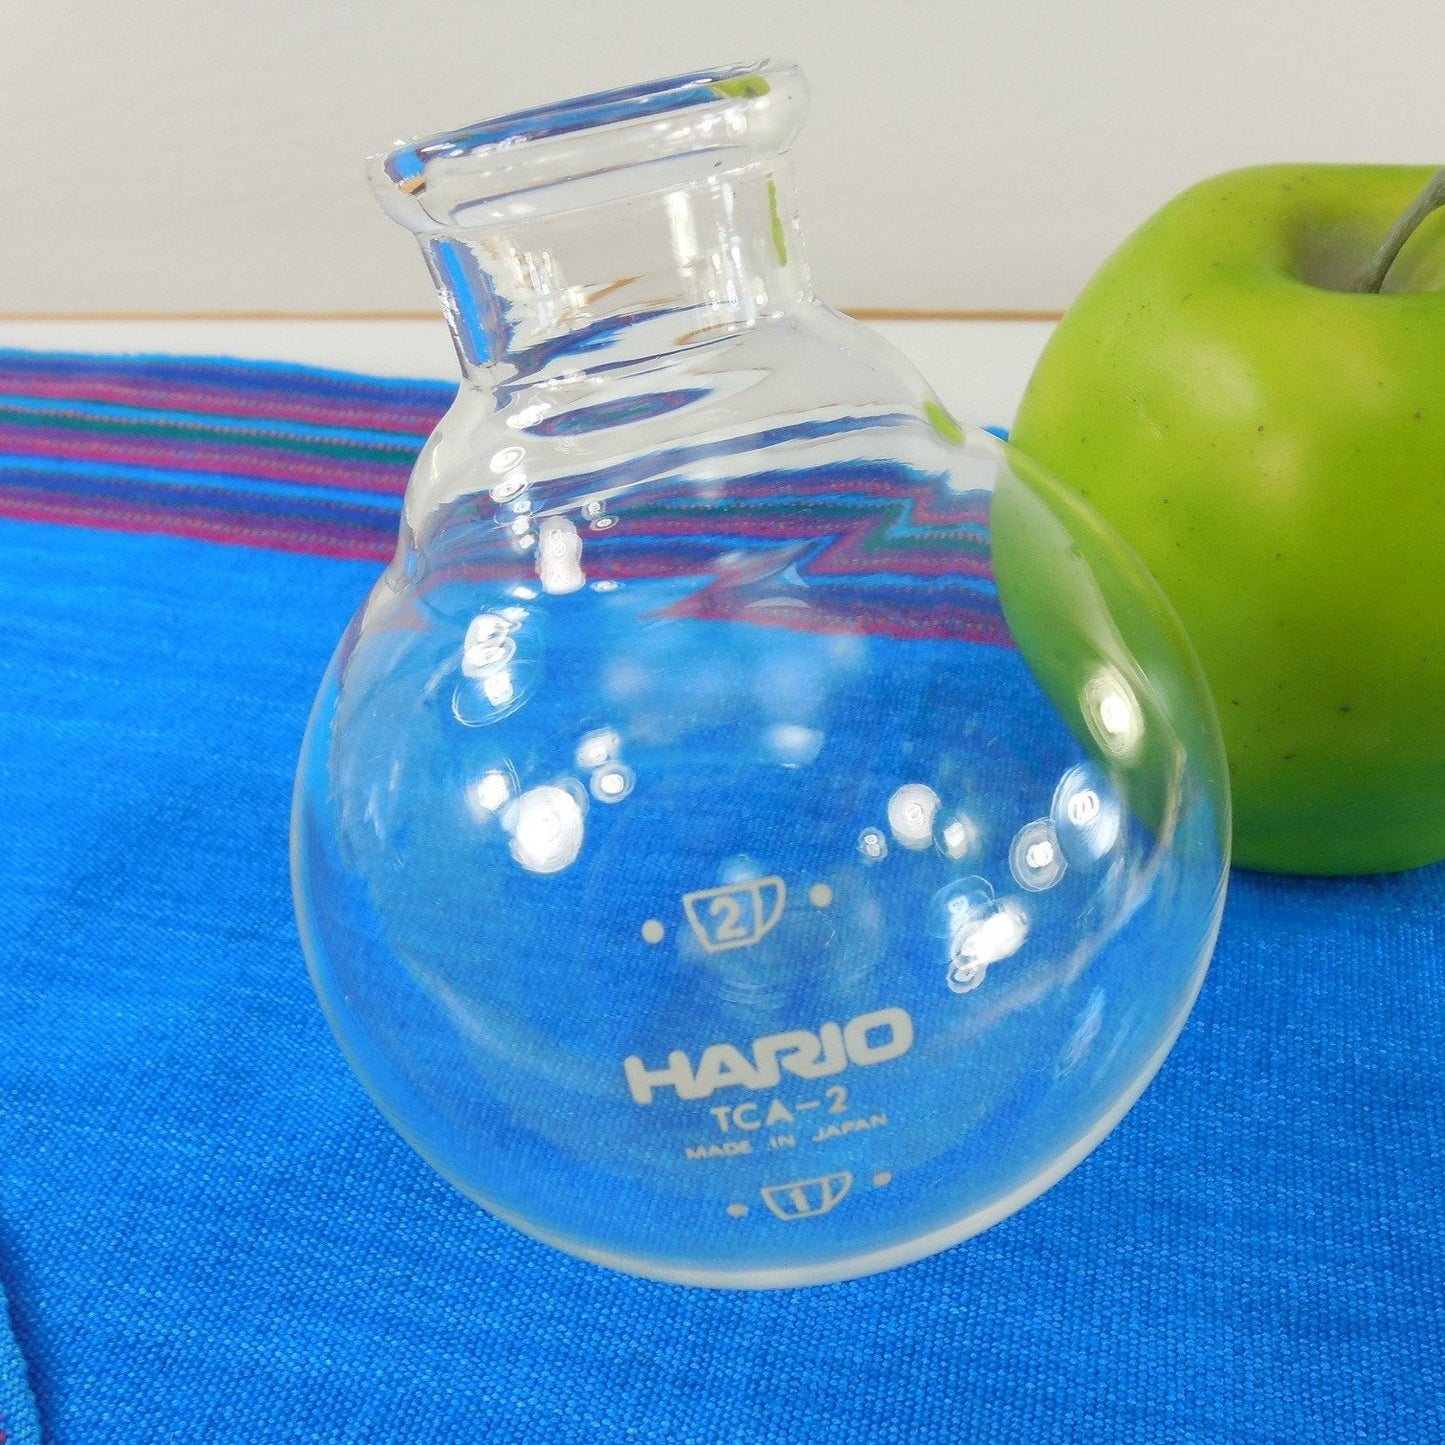 Hario Coffee Syphon NOS Replacement Part - TCA-2 Lower Glass Bowl